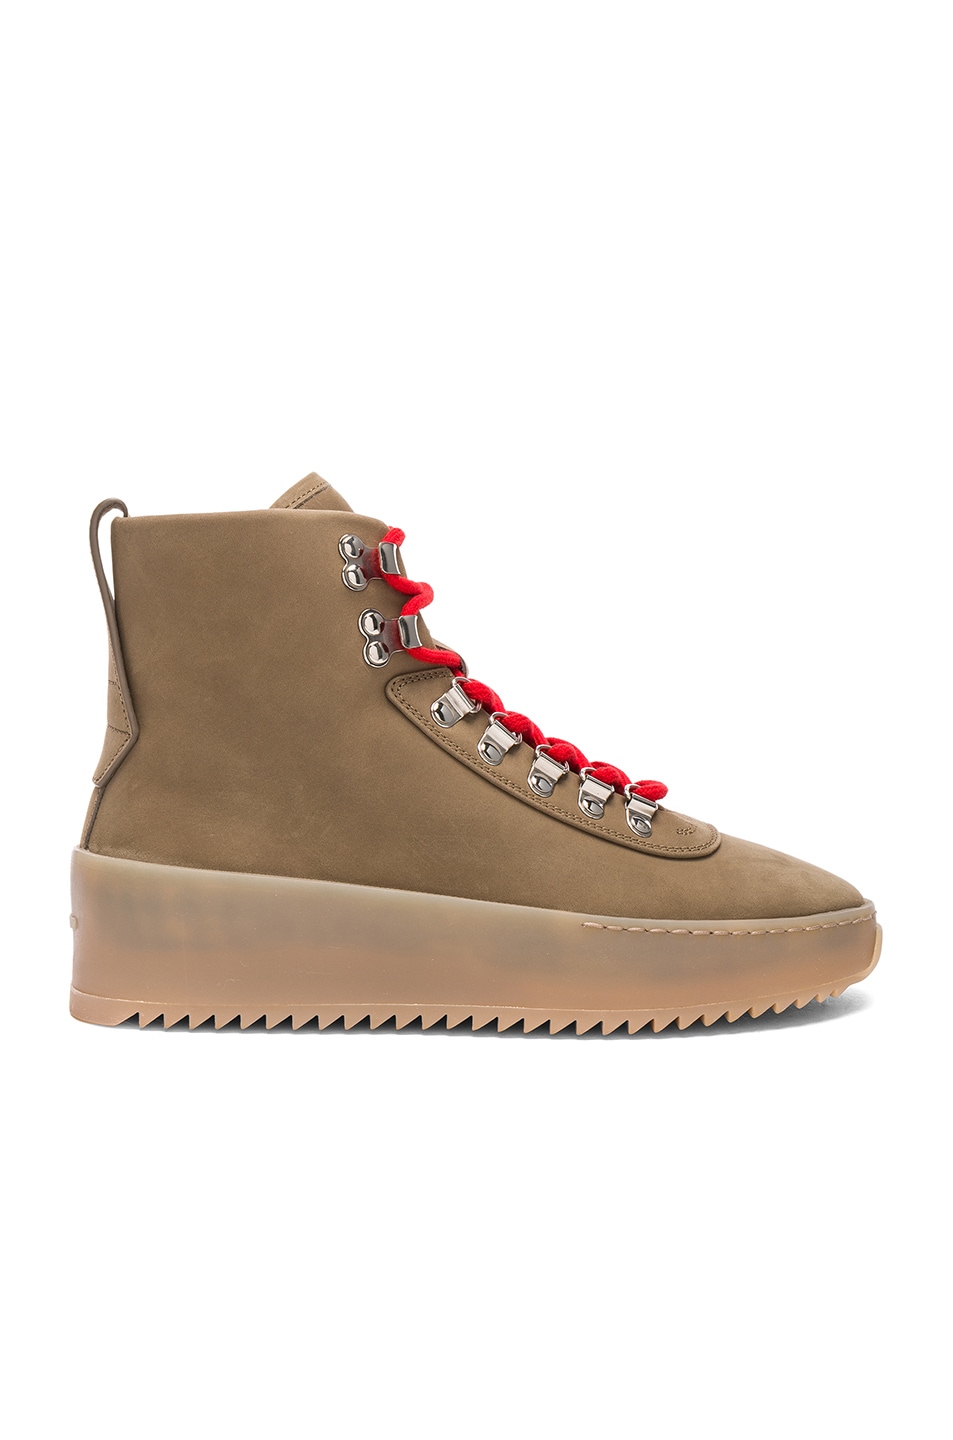 Image 1 of Fear of God Nubuck Leather Hiking Sneakers in Stone